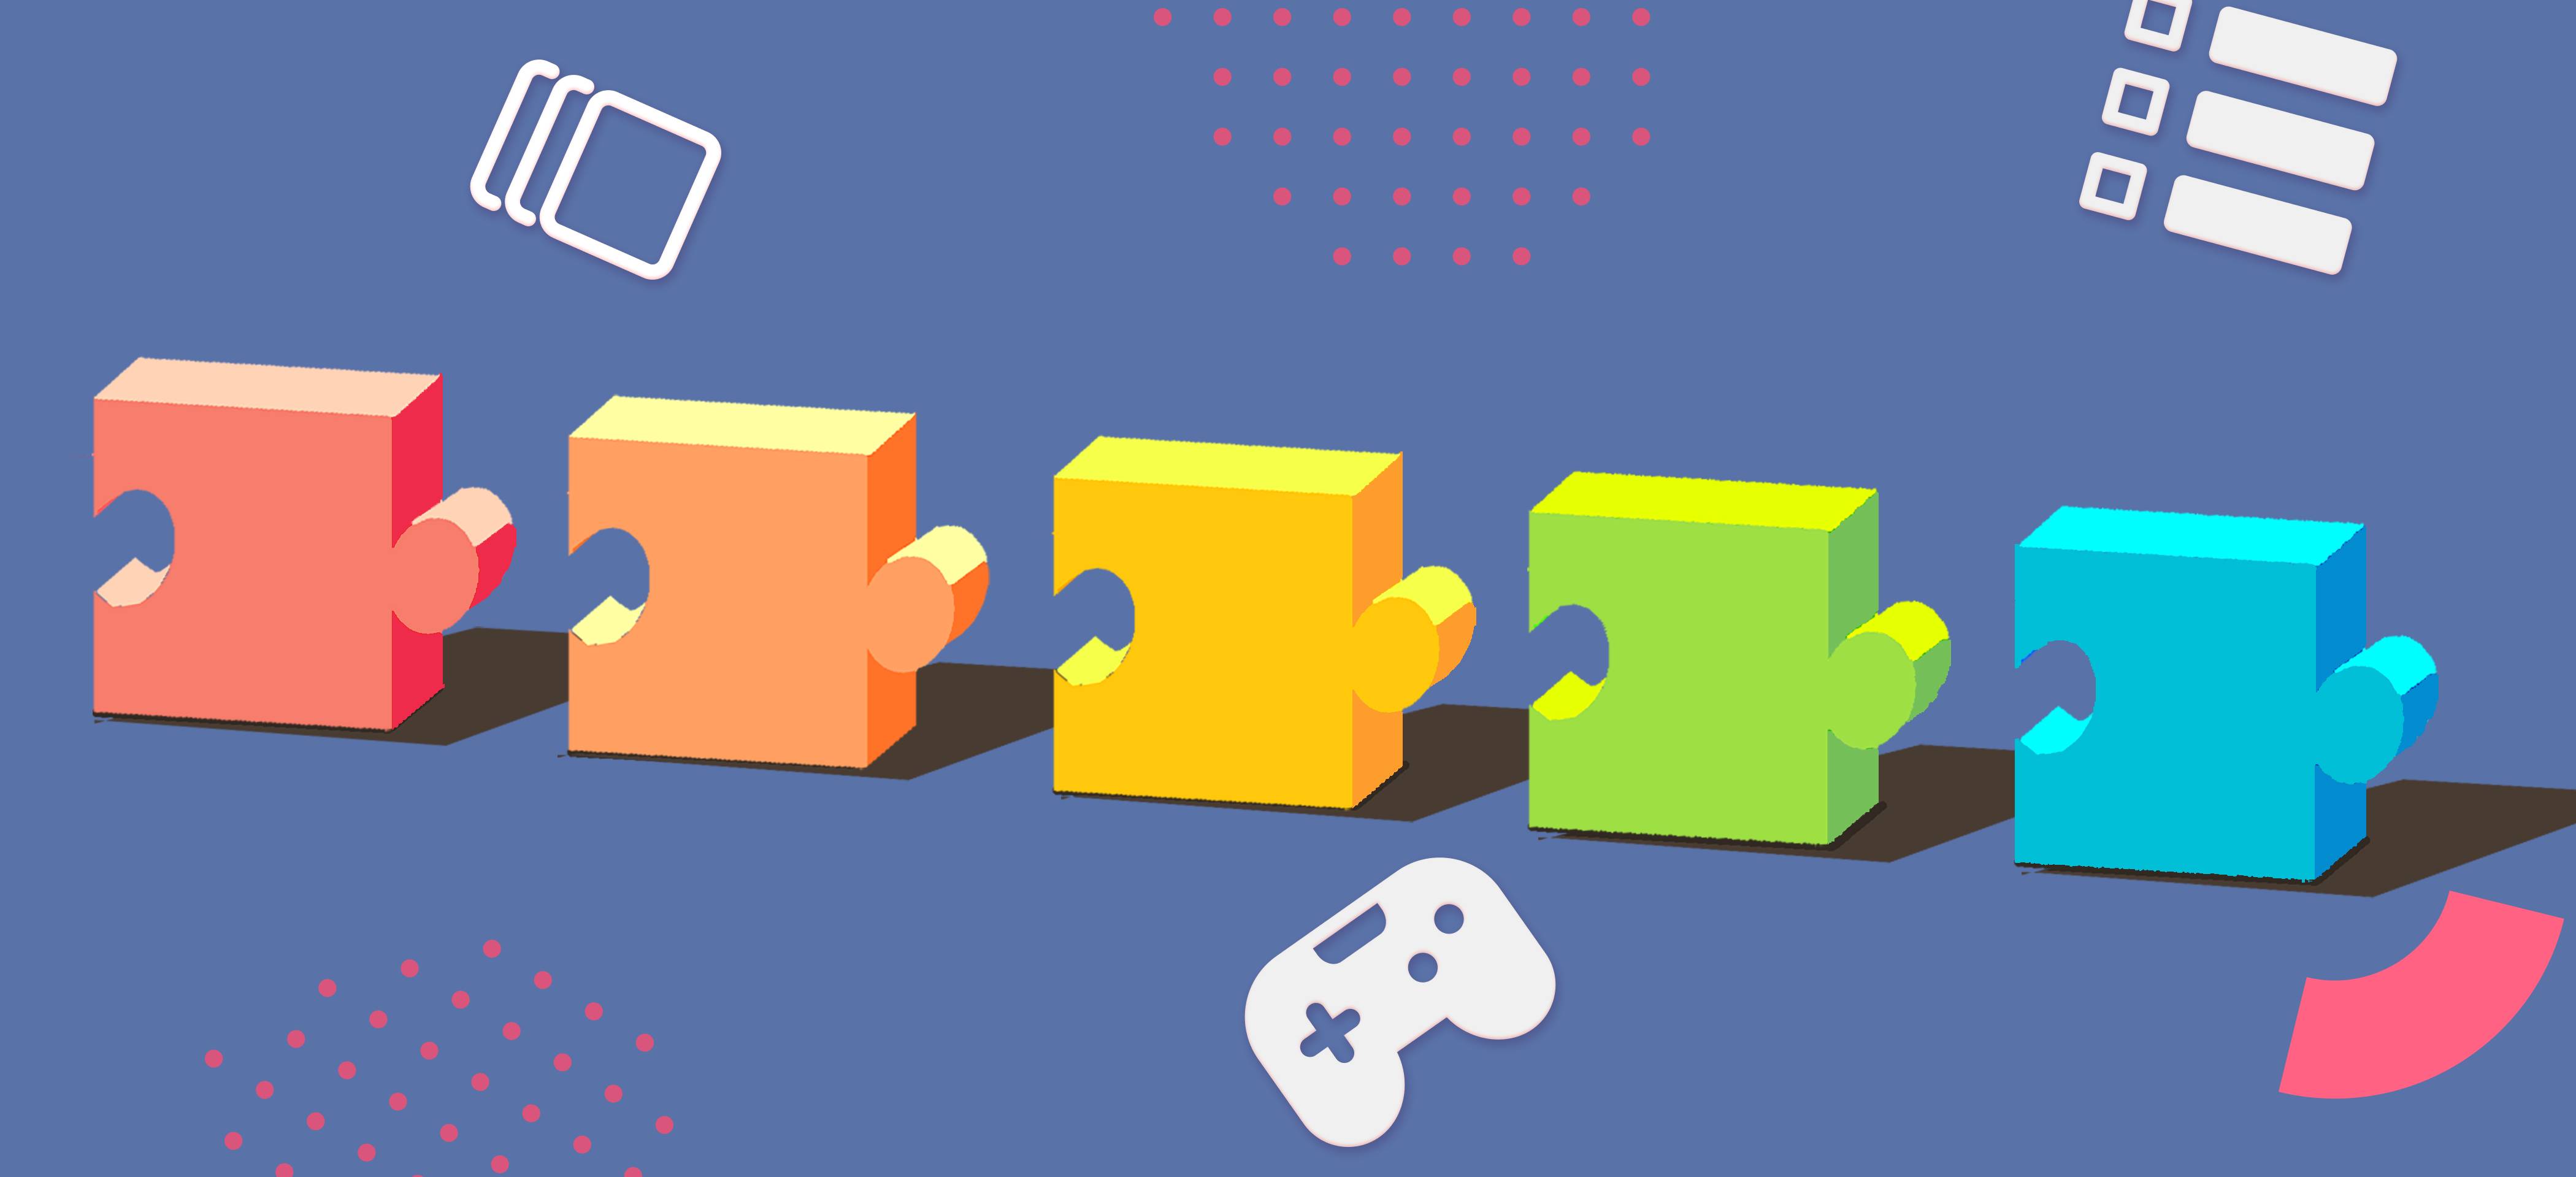 colorful puzzles lined up with MobLab games and survey icons on the side